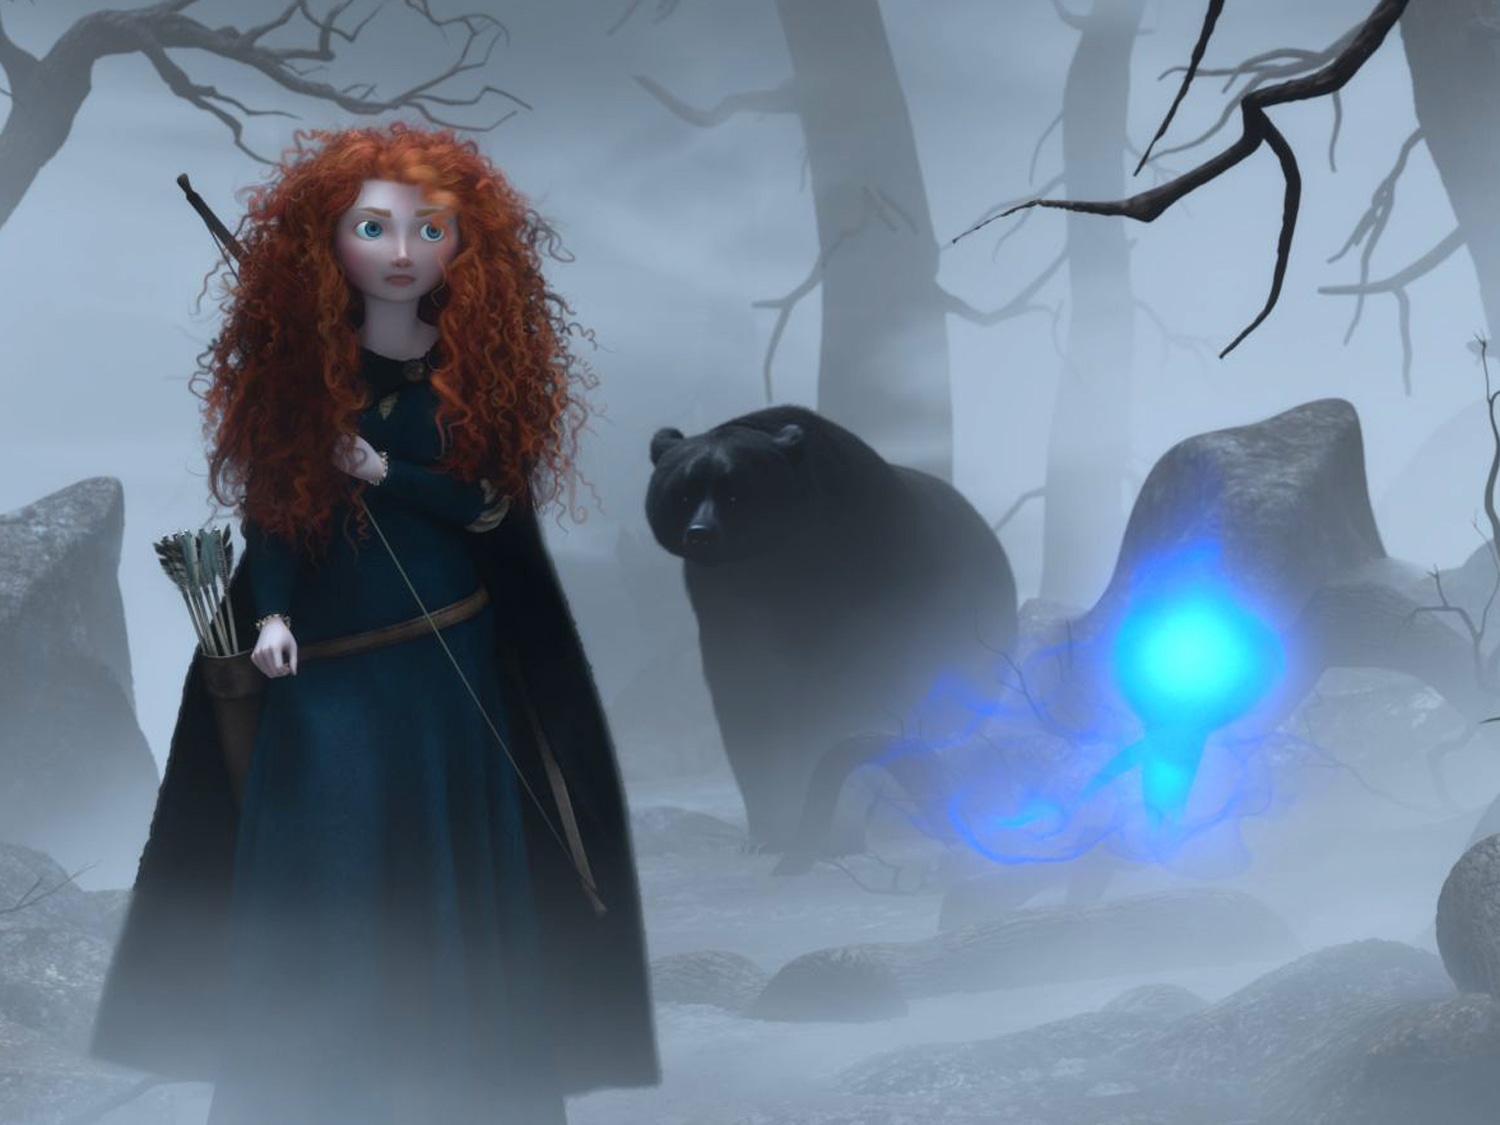 Brave' is beautiful, but doesn't have the heart of most Pixar films